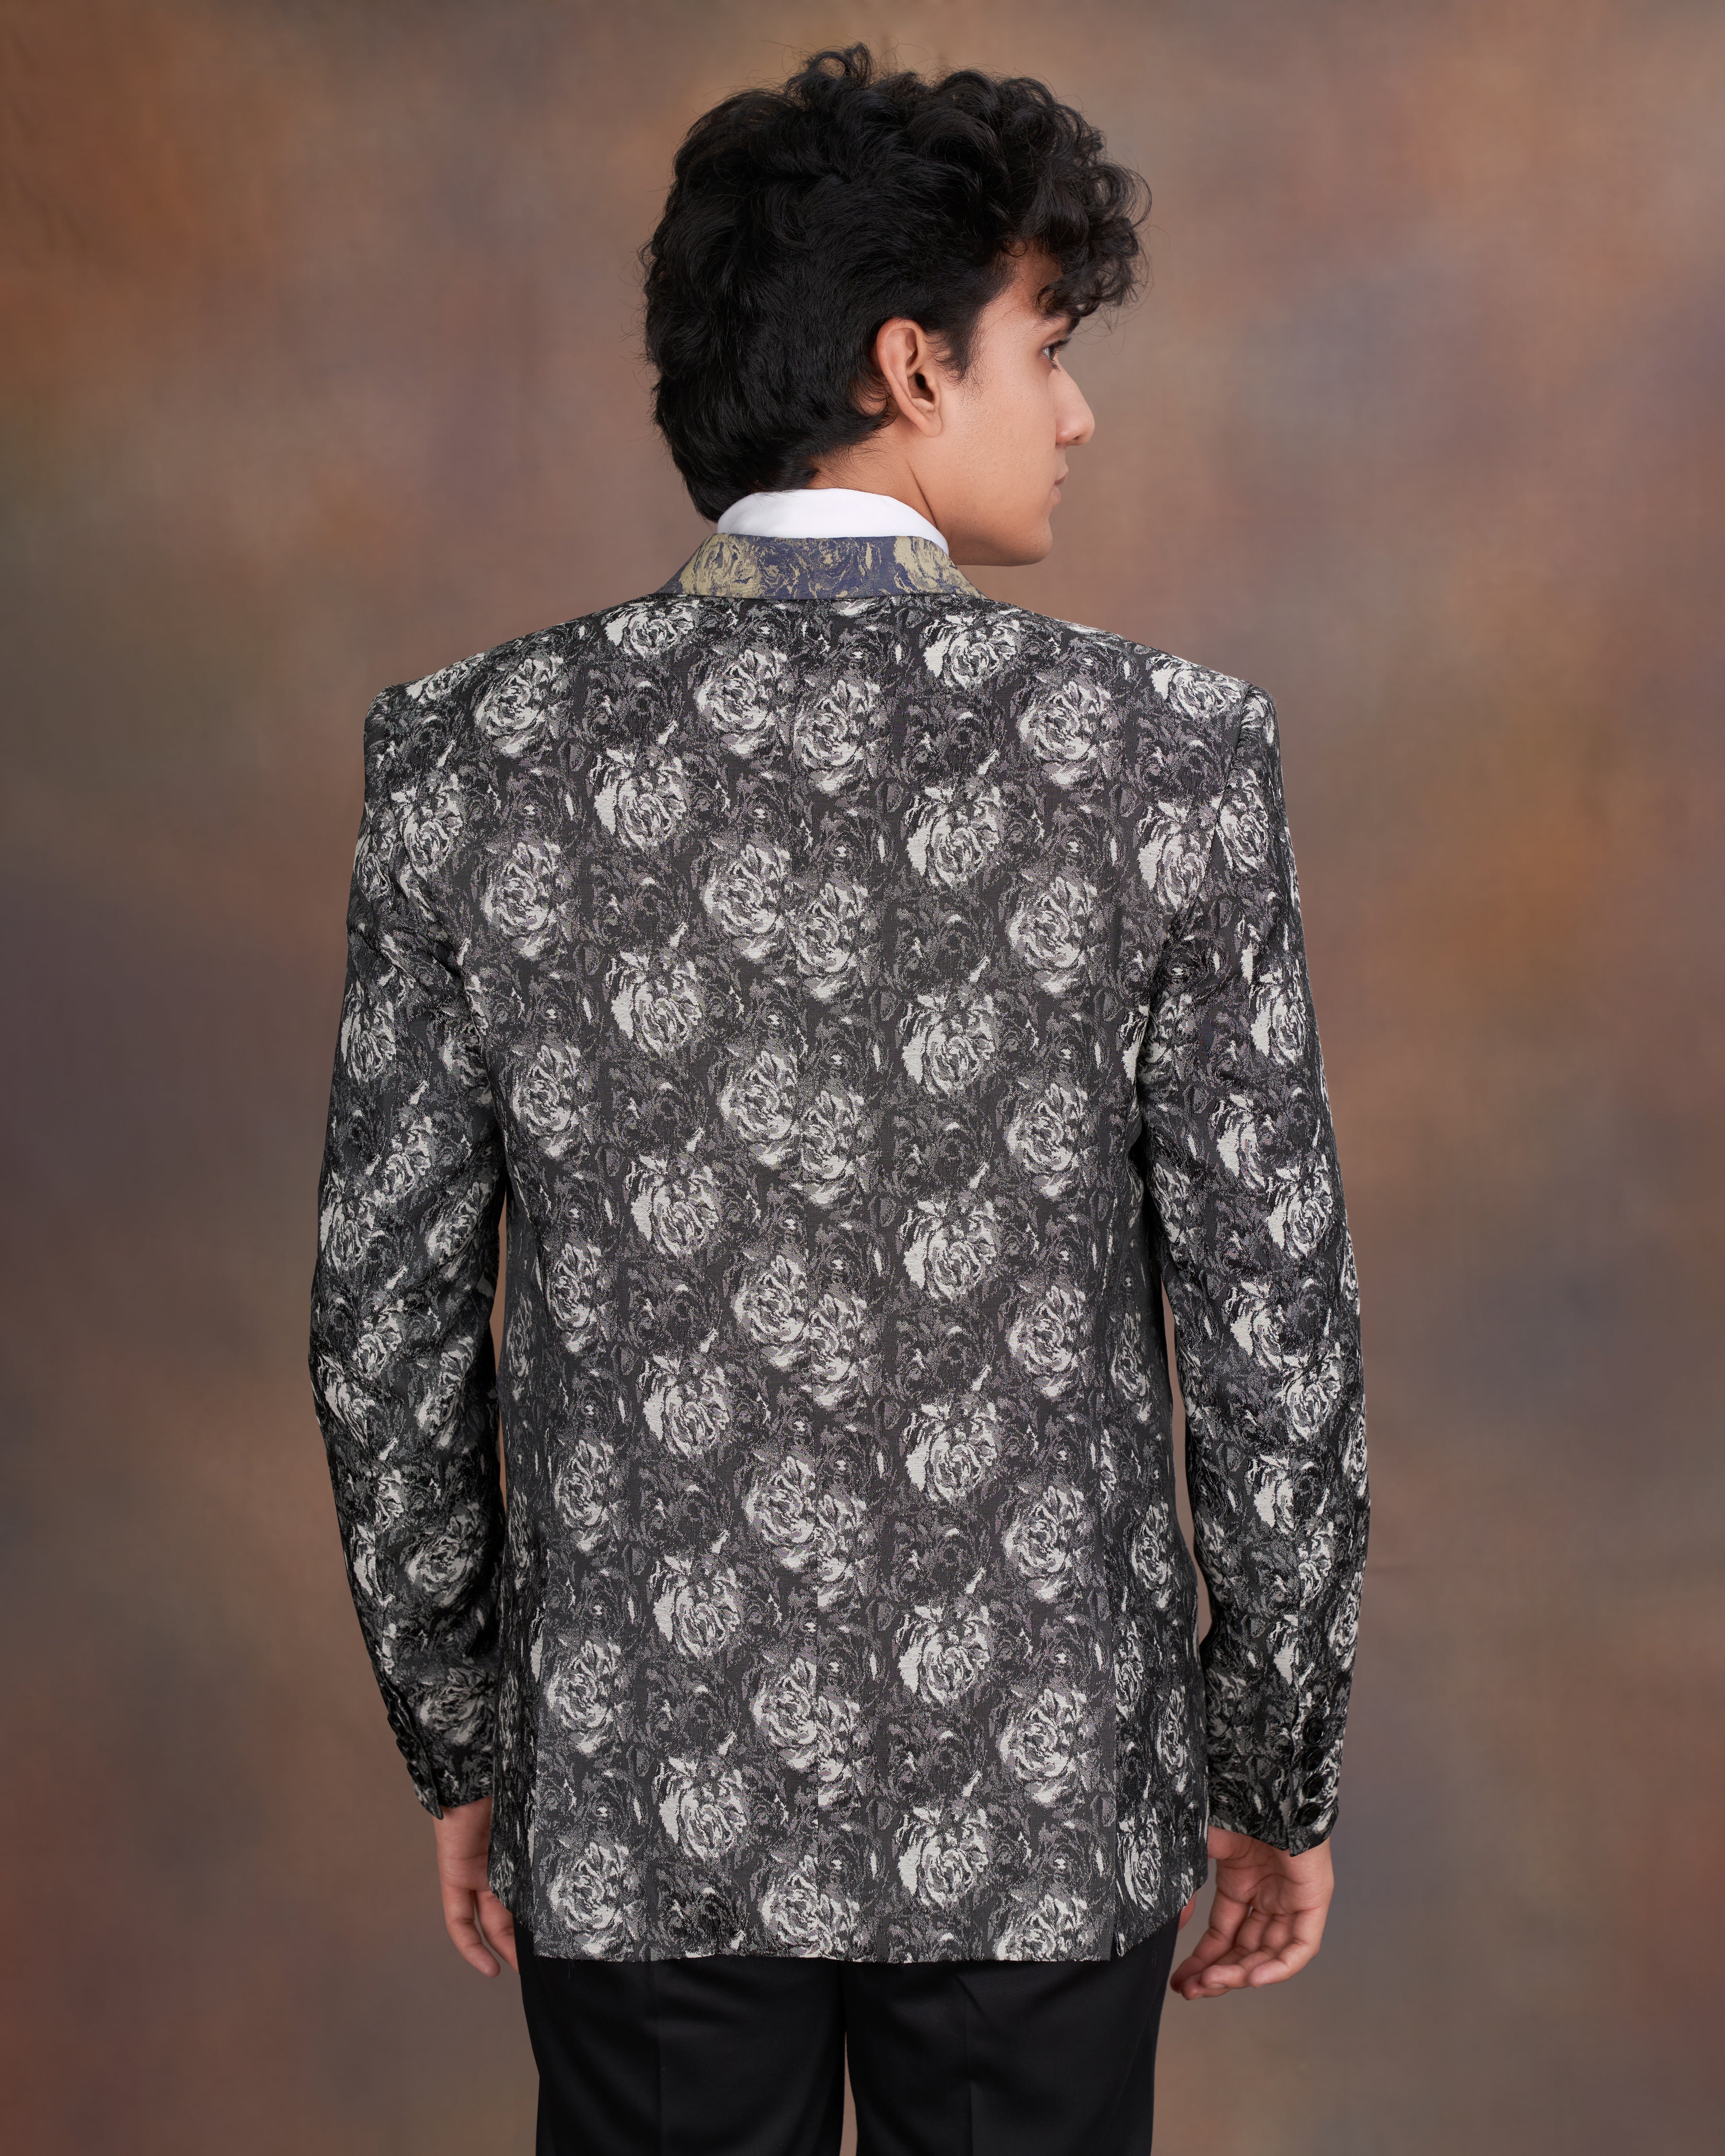 Charcoal Gray with Blue Jacquard Textured Designer Blazer BL2337-SB-D213-36, BL2337-SB-D213-38, BL2337-SB-D213-40, BL2337-SB-D213-42, BL2337-SB-D213-44, BL2337-SB-D213-46, BL2337-SB-D213-48, BL2337-SB-D213-50, BL2337-SB-D213-52, BL2337-SB-D213-54, BL2337-SB-D213-56, BL2337-SB-D213-58, BL2337-SB-D213-60	